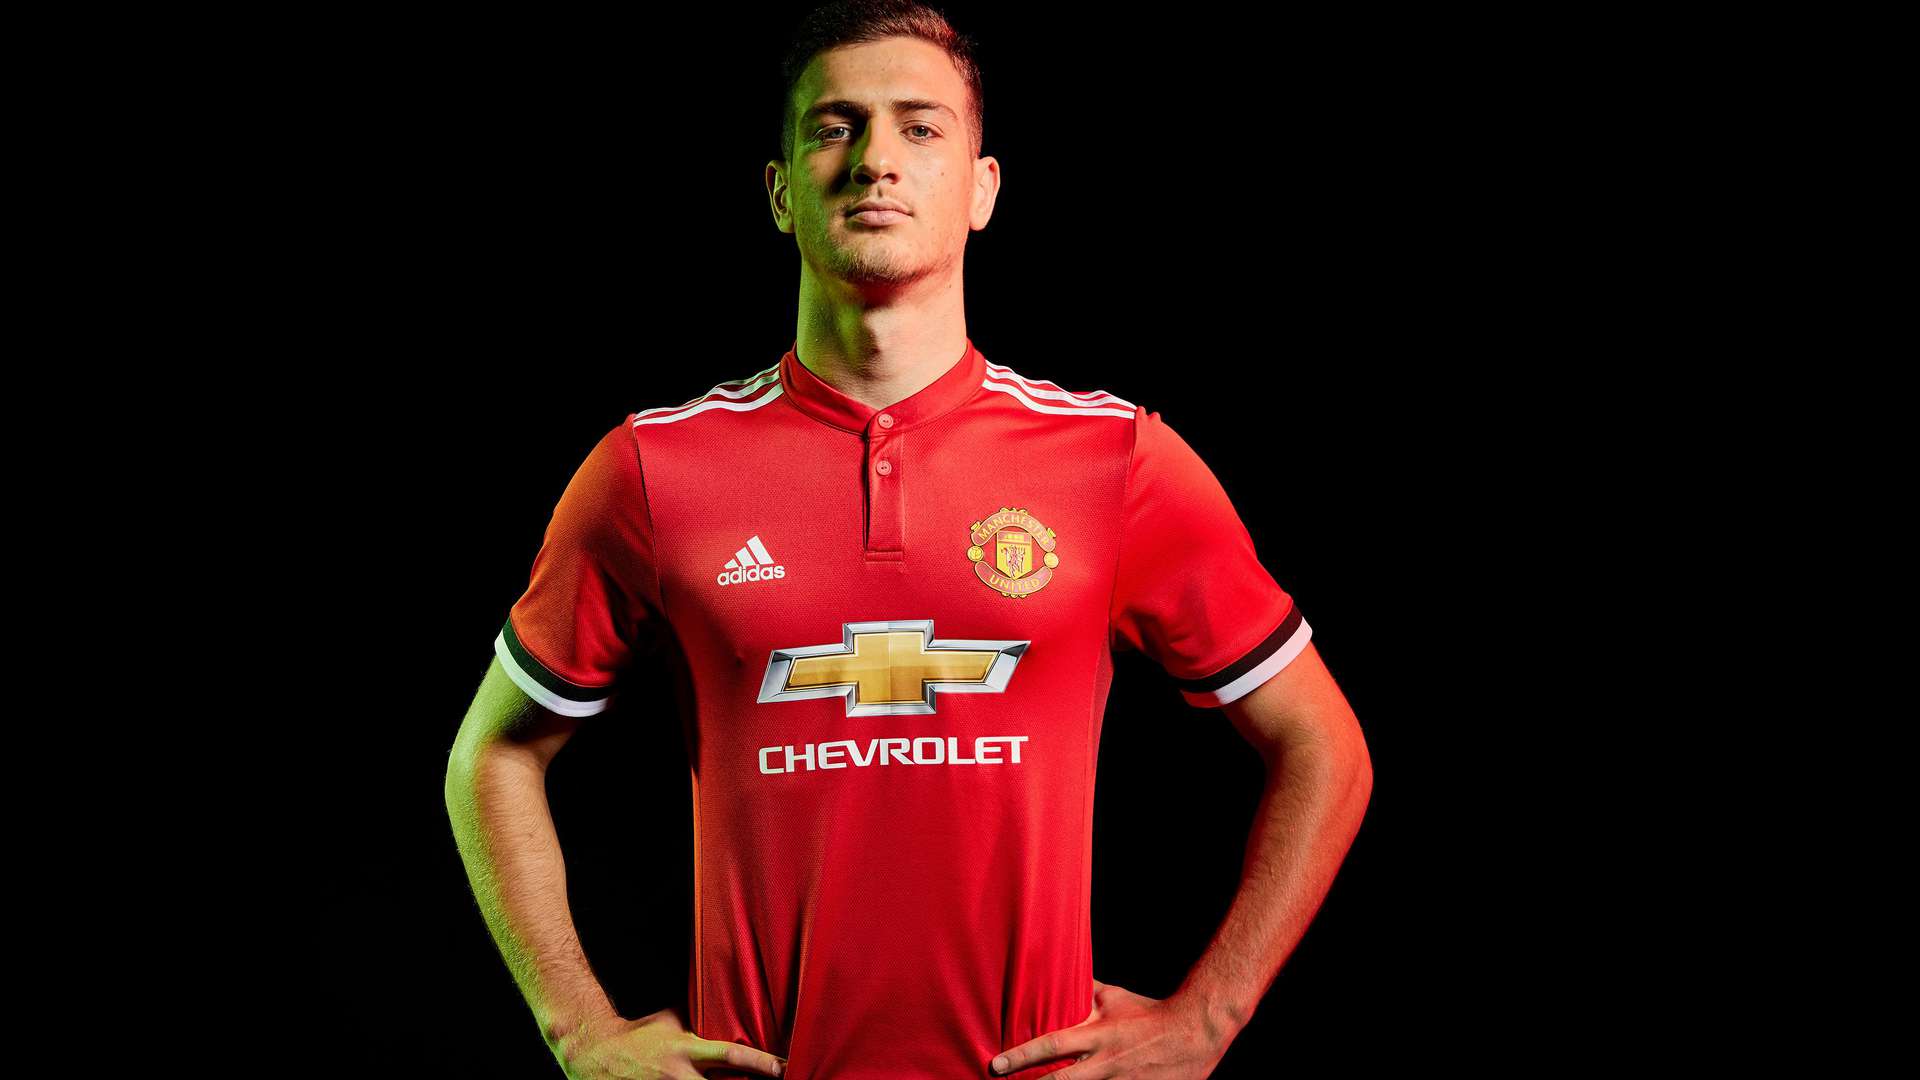 Manchester United announce the signing of Diogo Dalot. Manchester